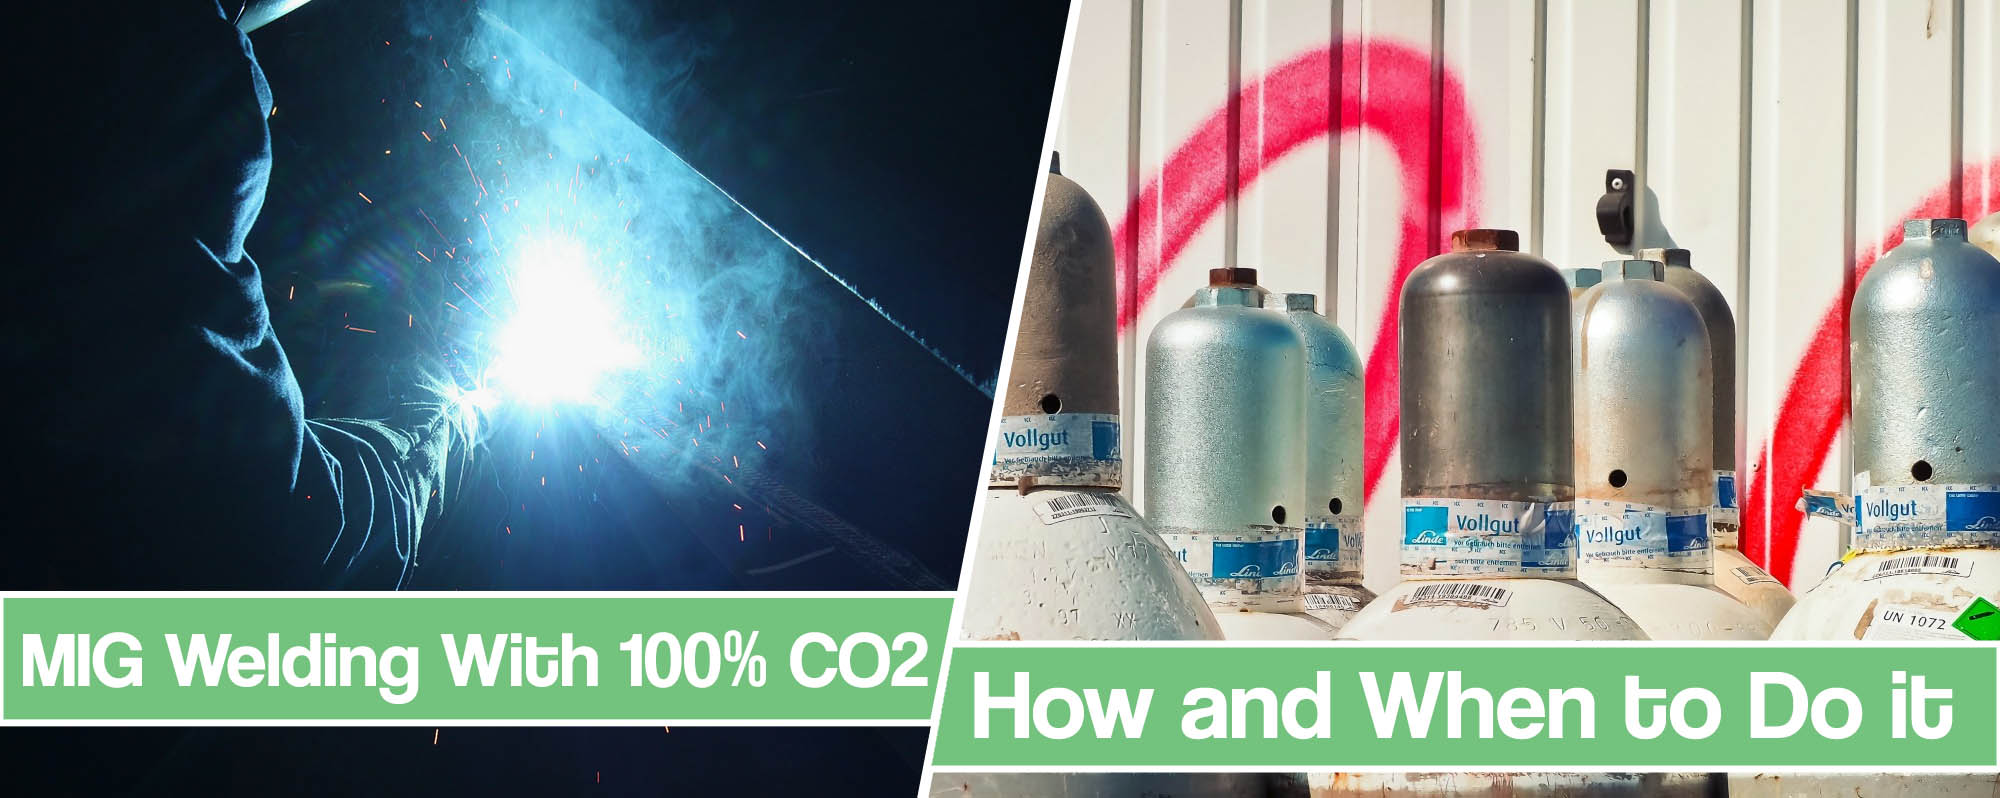 Feature image for Mig Welding-With-100 Co2 article